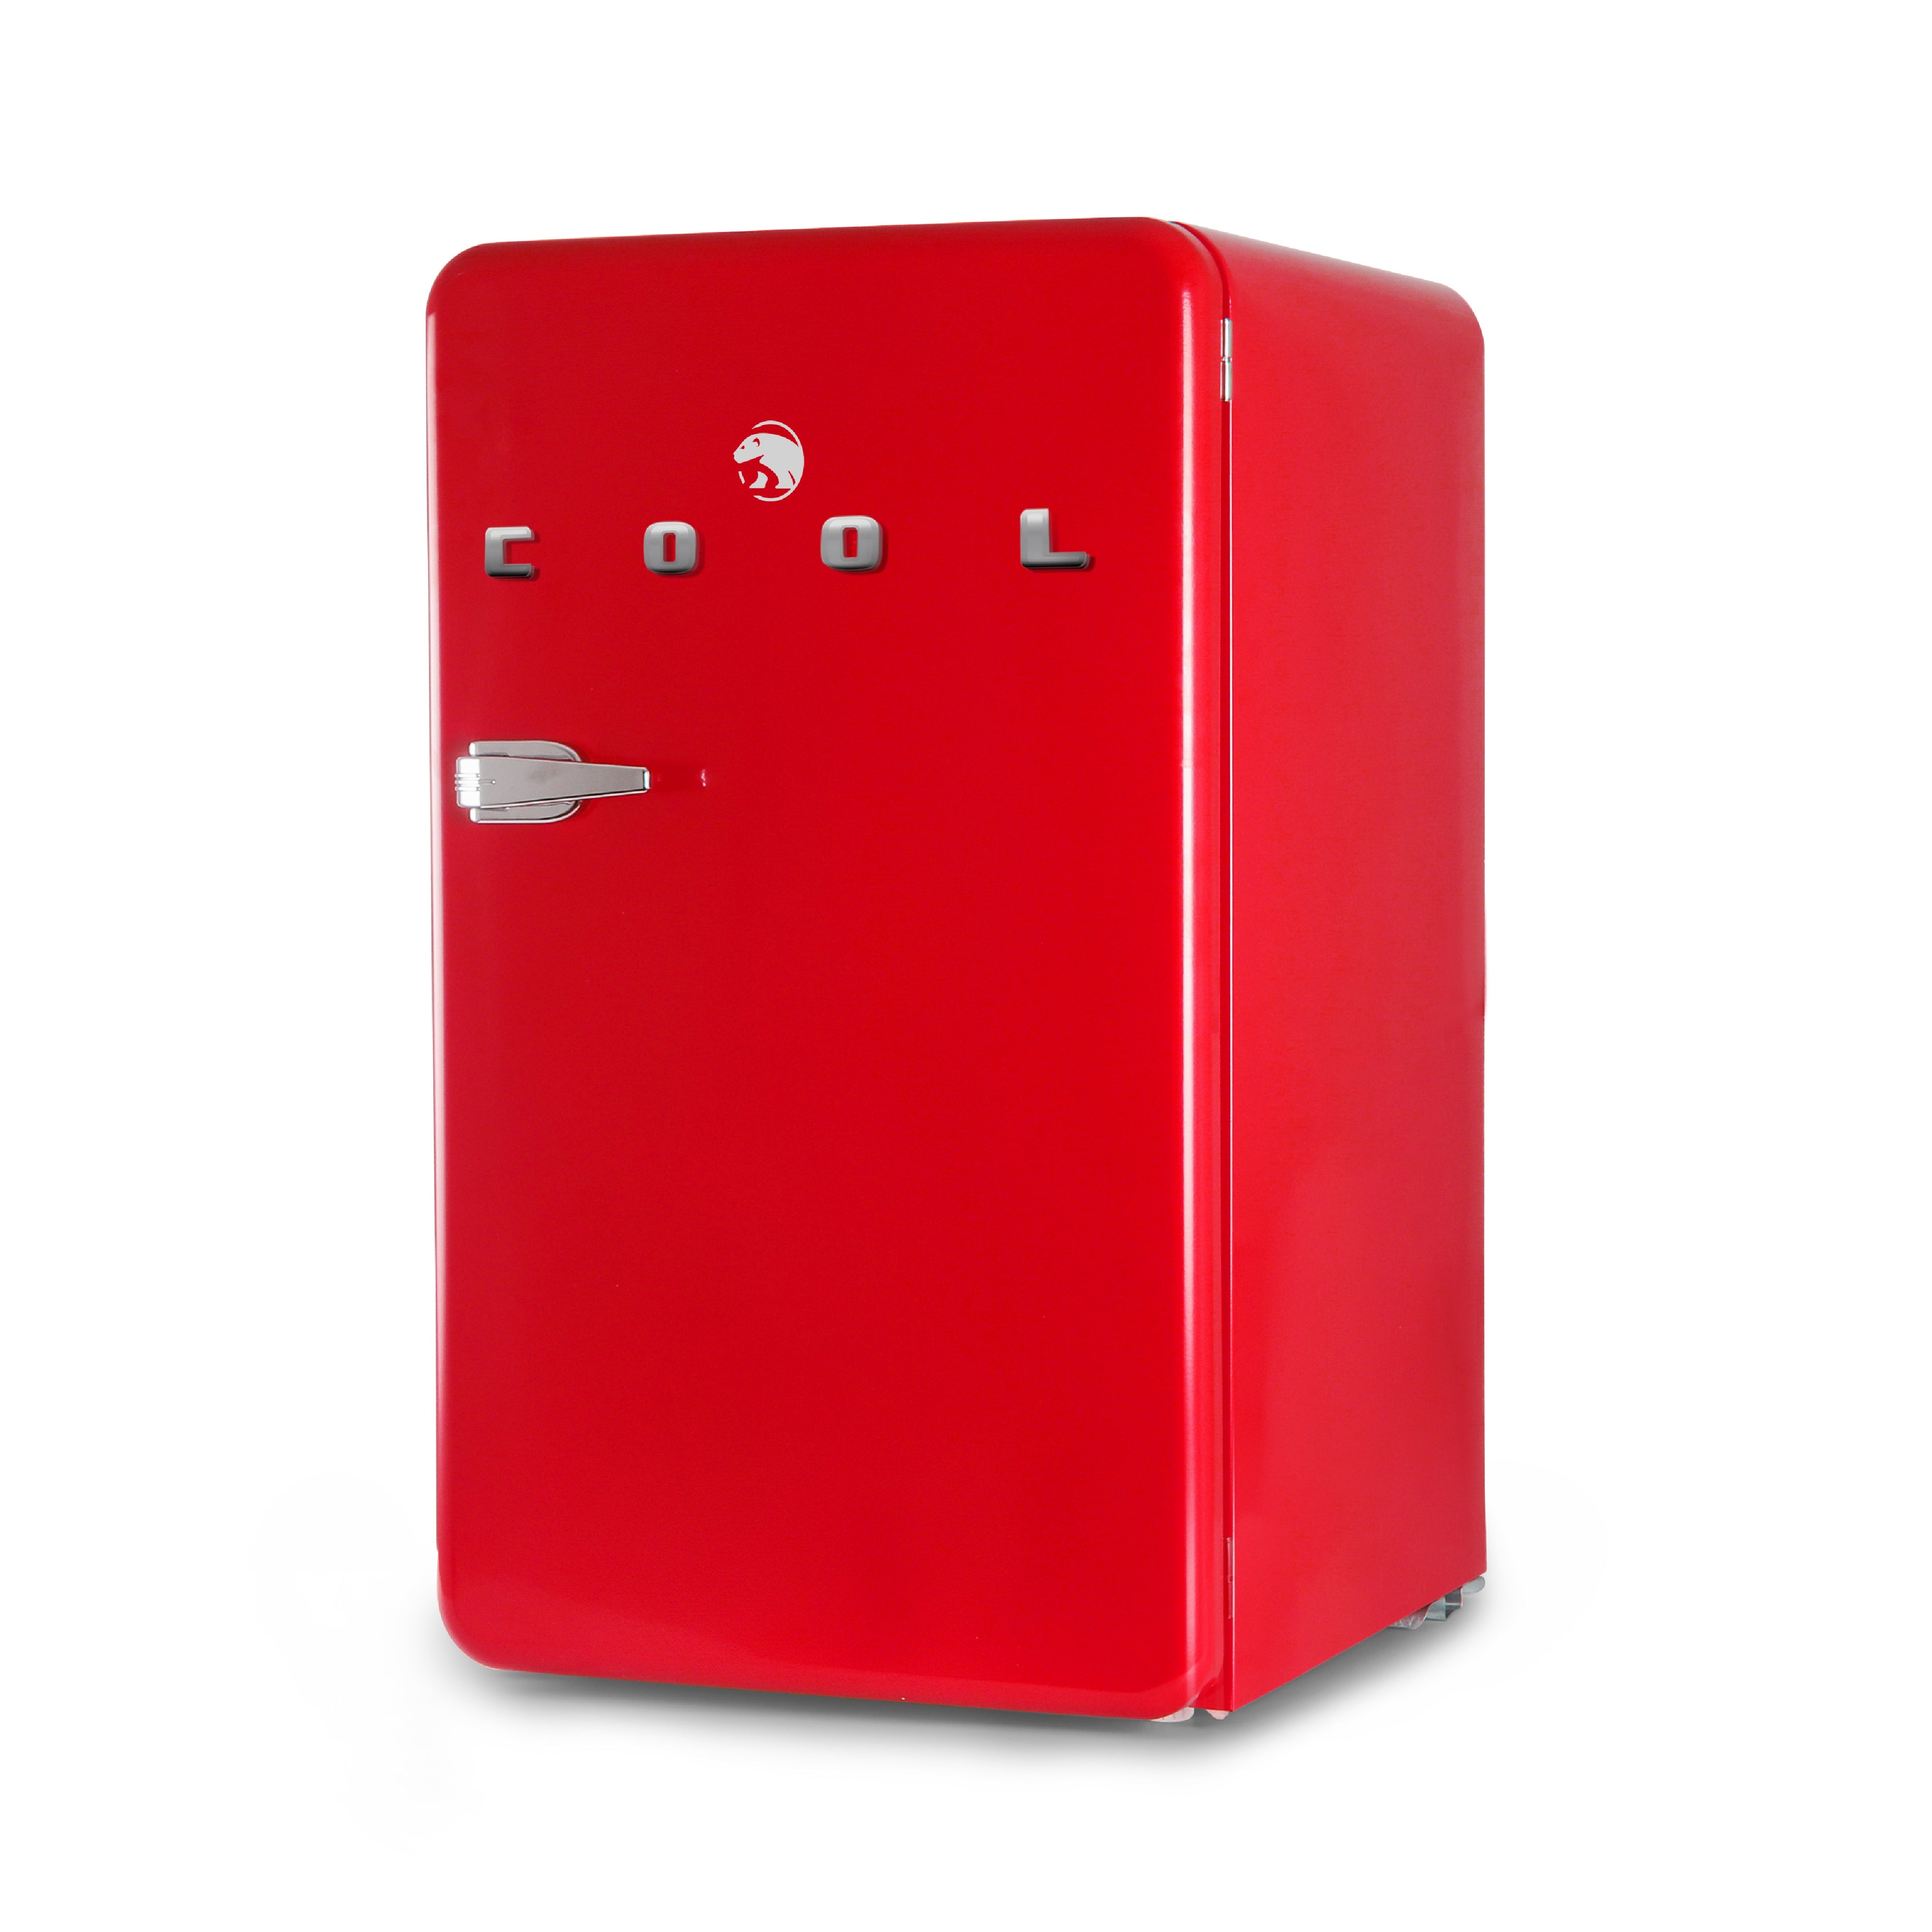 COMMERCIAL COOL Retro Refrigerator 3.2 Cu. Ft., Red